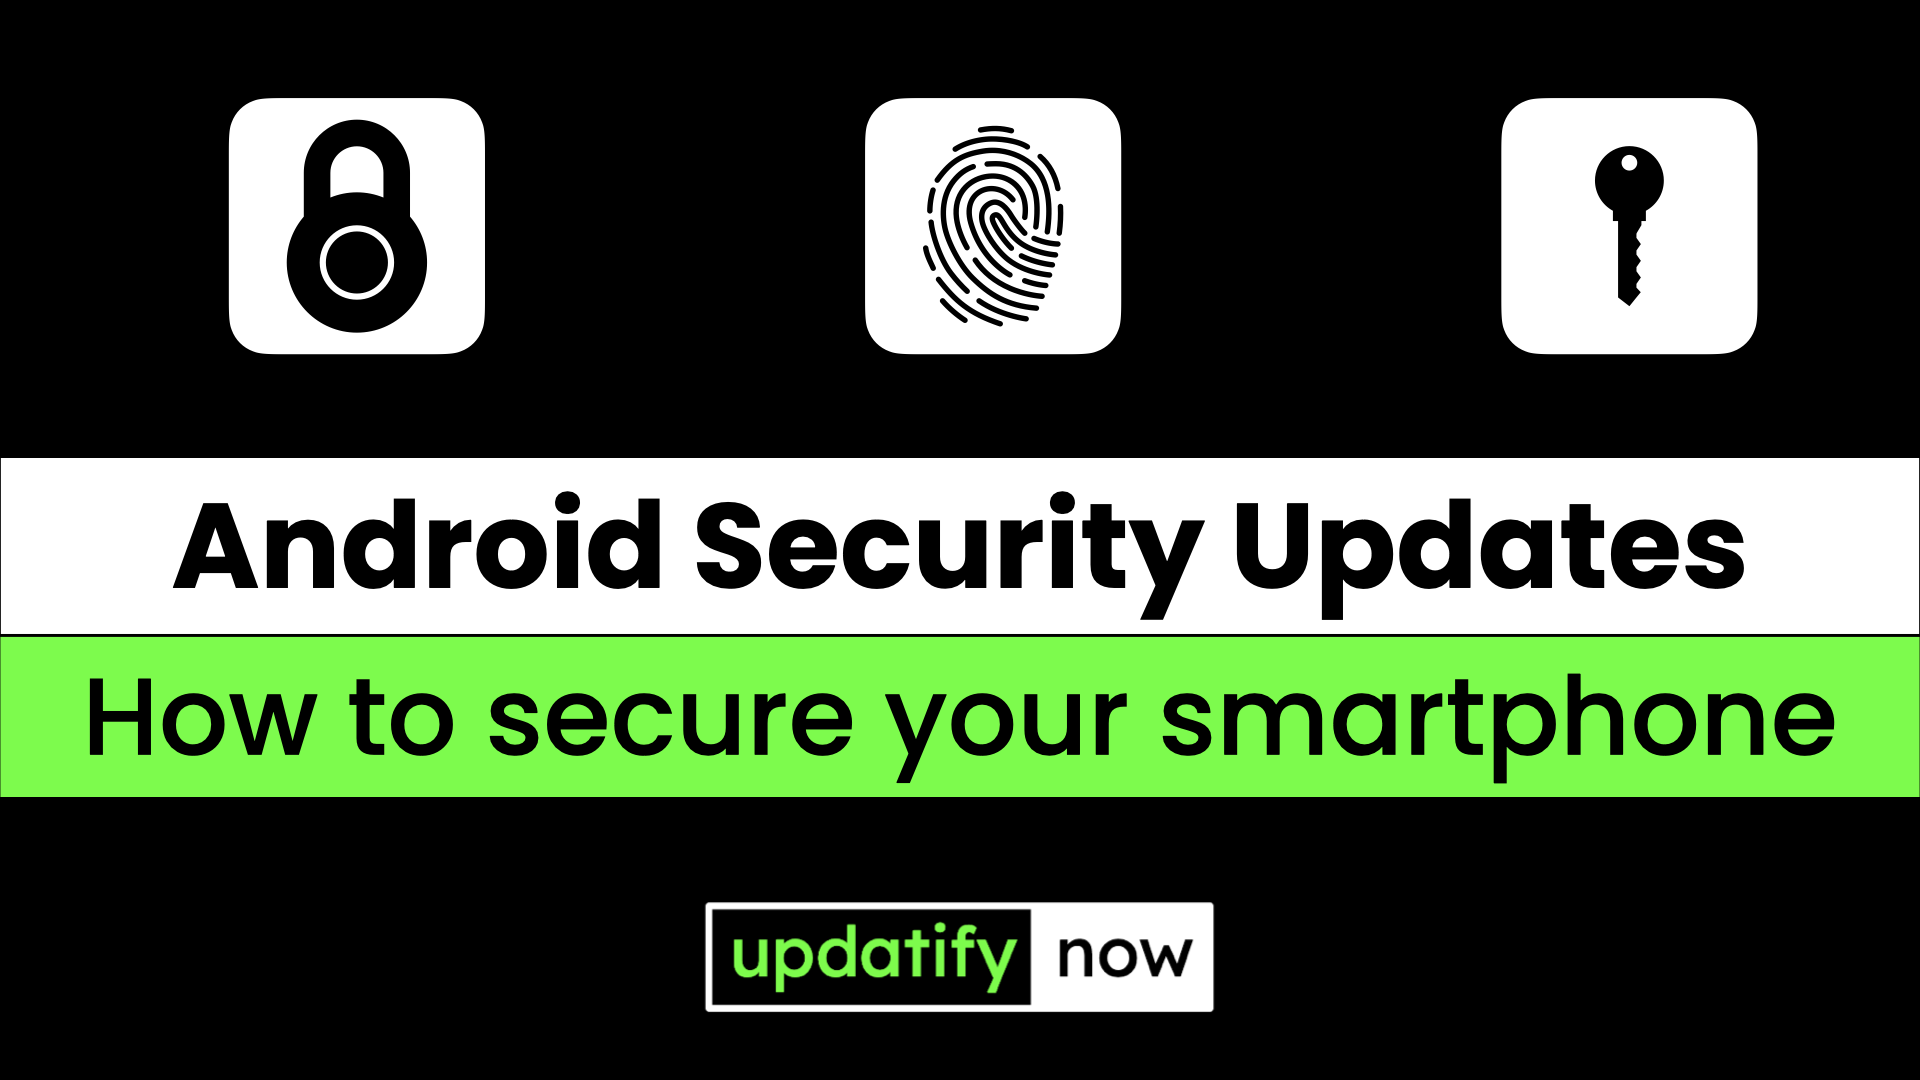 Android Security Updates